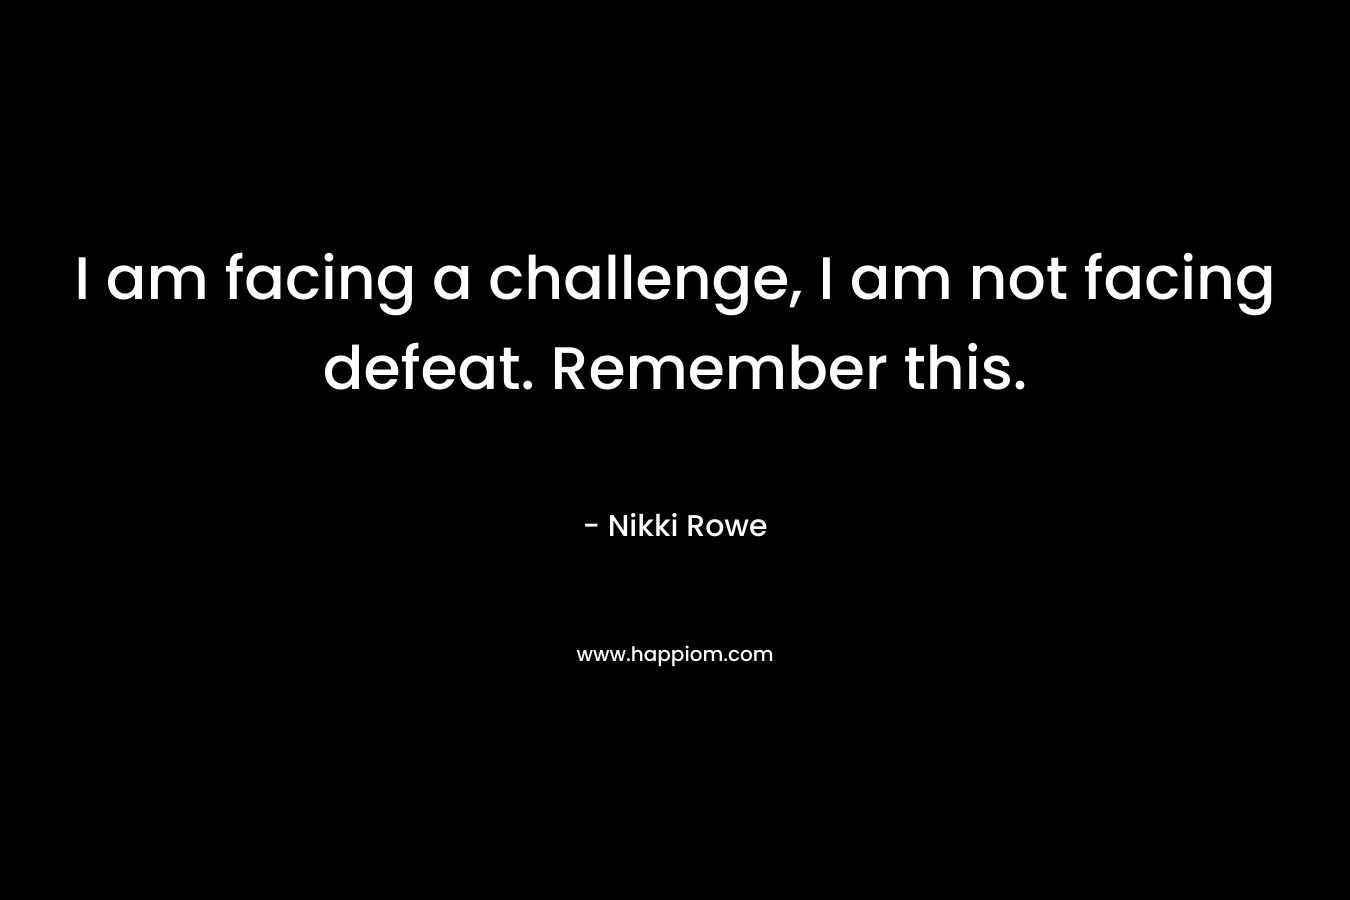 I am facing a challenge, I am not facing defeat. Remember this.